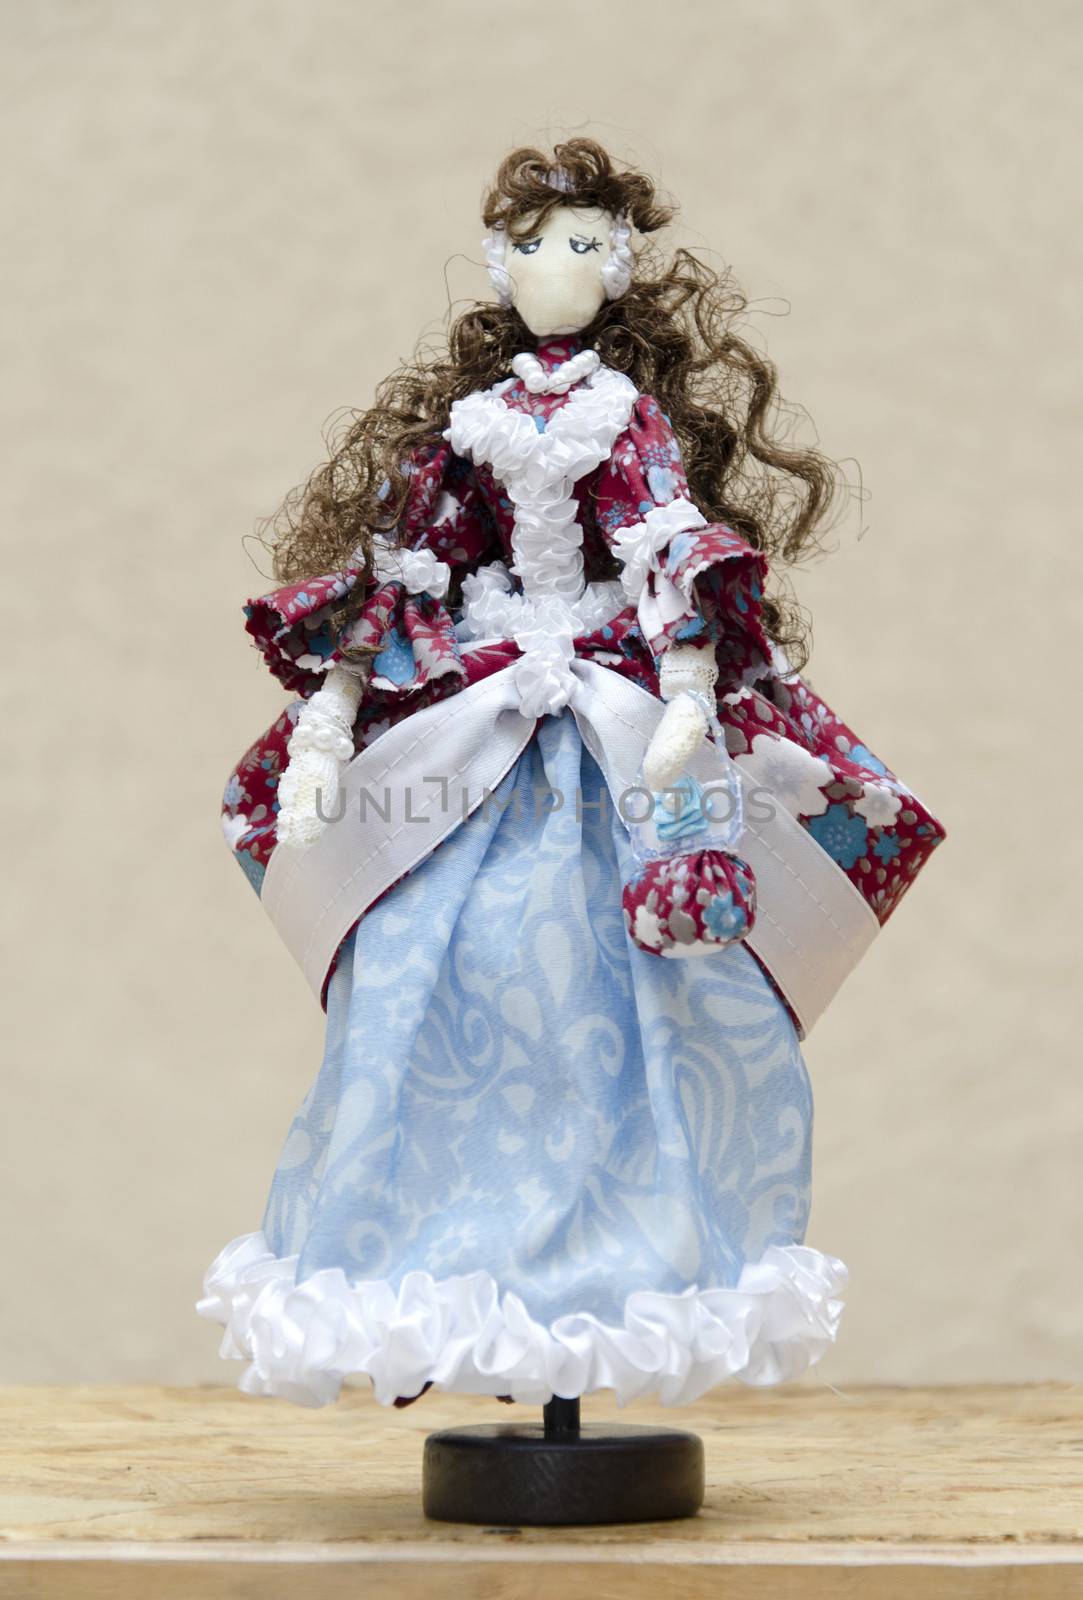 Handmade doll in a ball gown by pt-home